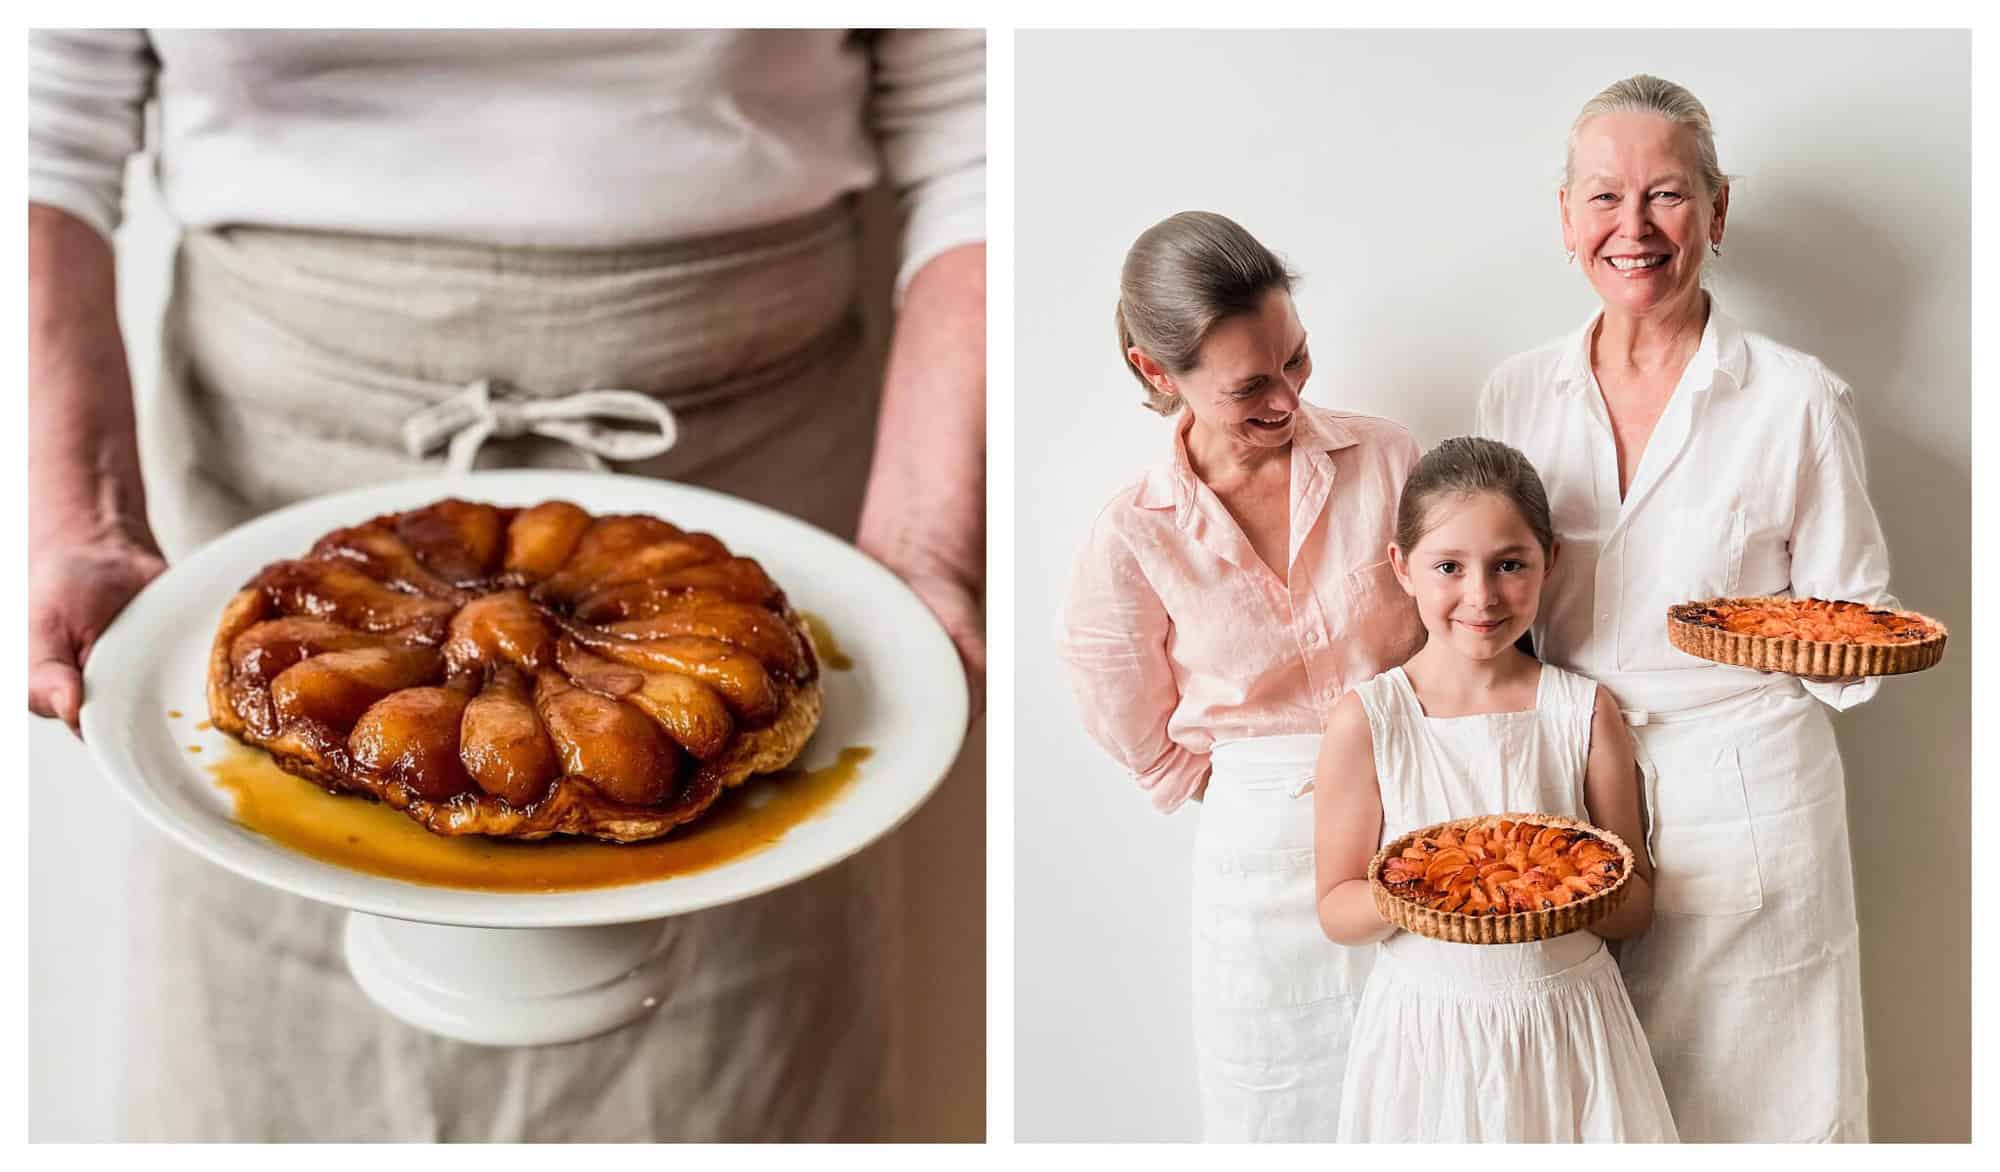 Left: Marjorie Taylor from The Cook's Atelier holds a pear tarte tatin, presented on a white plate. Right: Marjorie Taylor, Kendall Smith, and Kendall's daughter are pictured, smiling and holding homemade fruit tarts